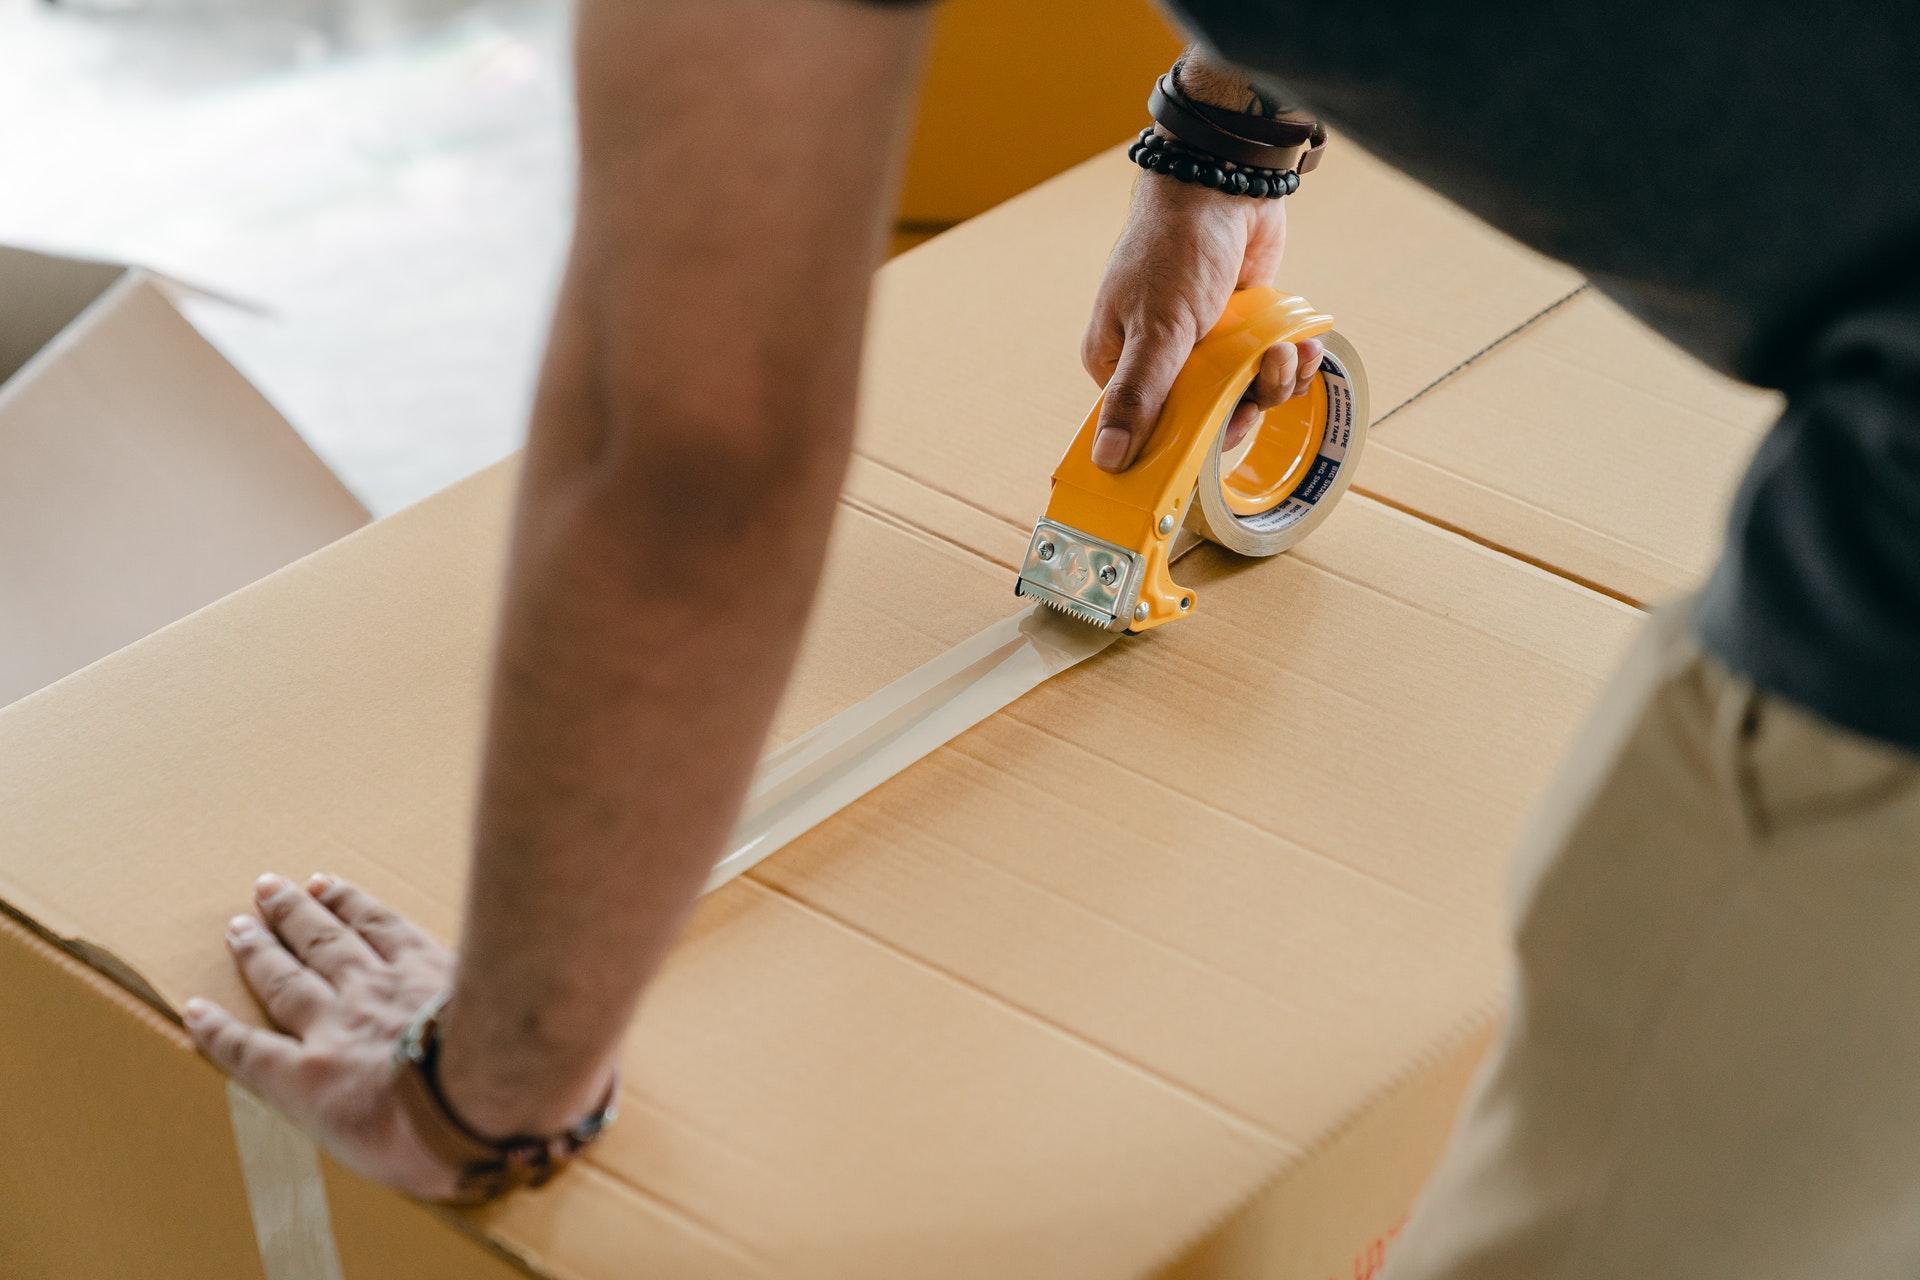 A man taping up an ecommerce order to be shipped to customers.